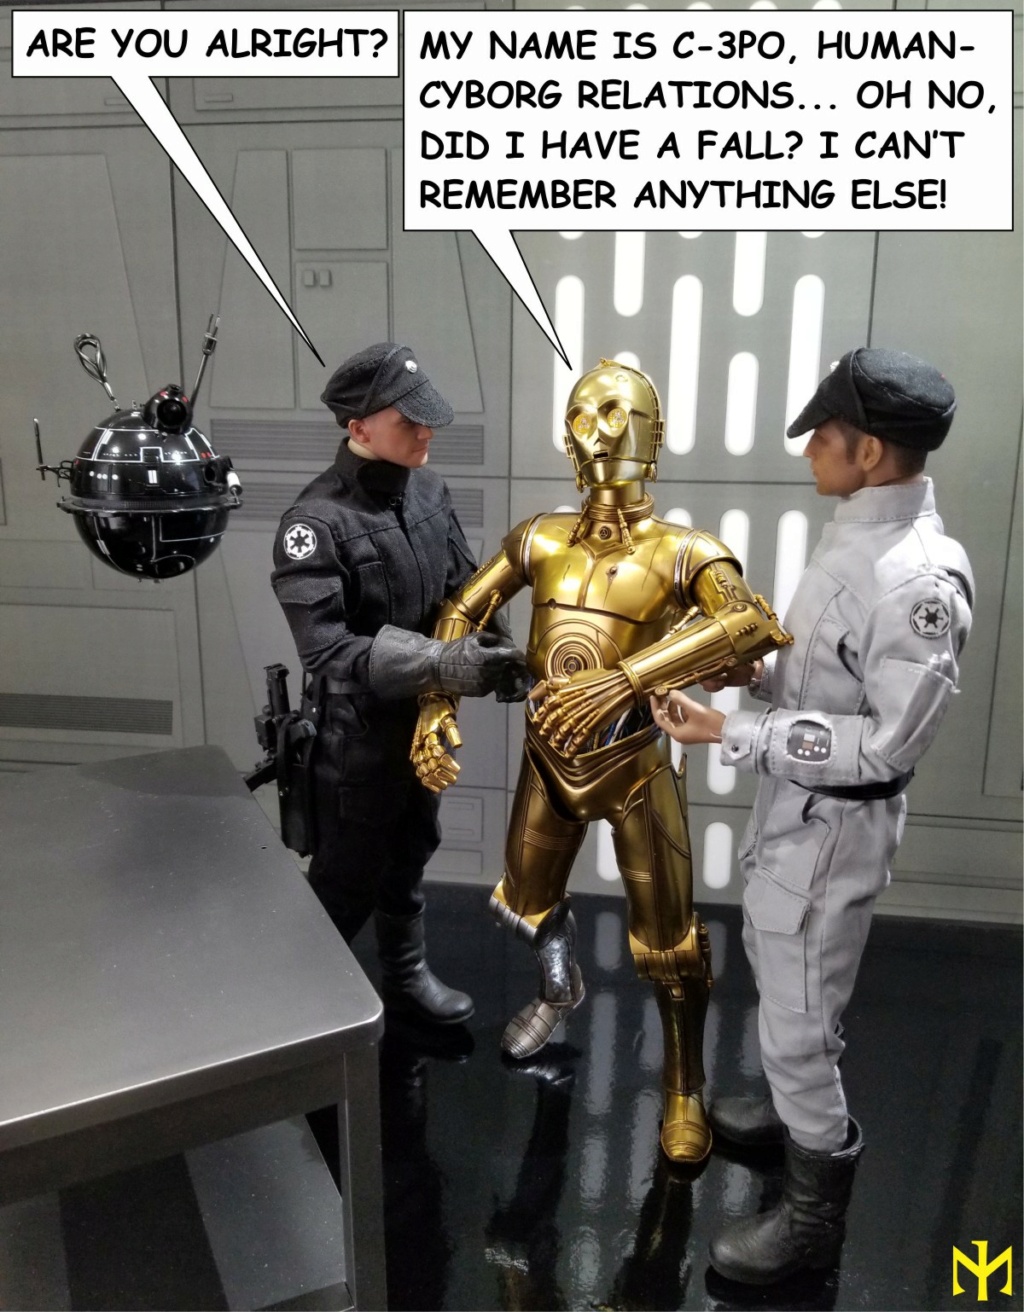 satire - STAR WARS The Accident Story (photo heavy) (updated with alternate/deleted footage) Swacc113